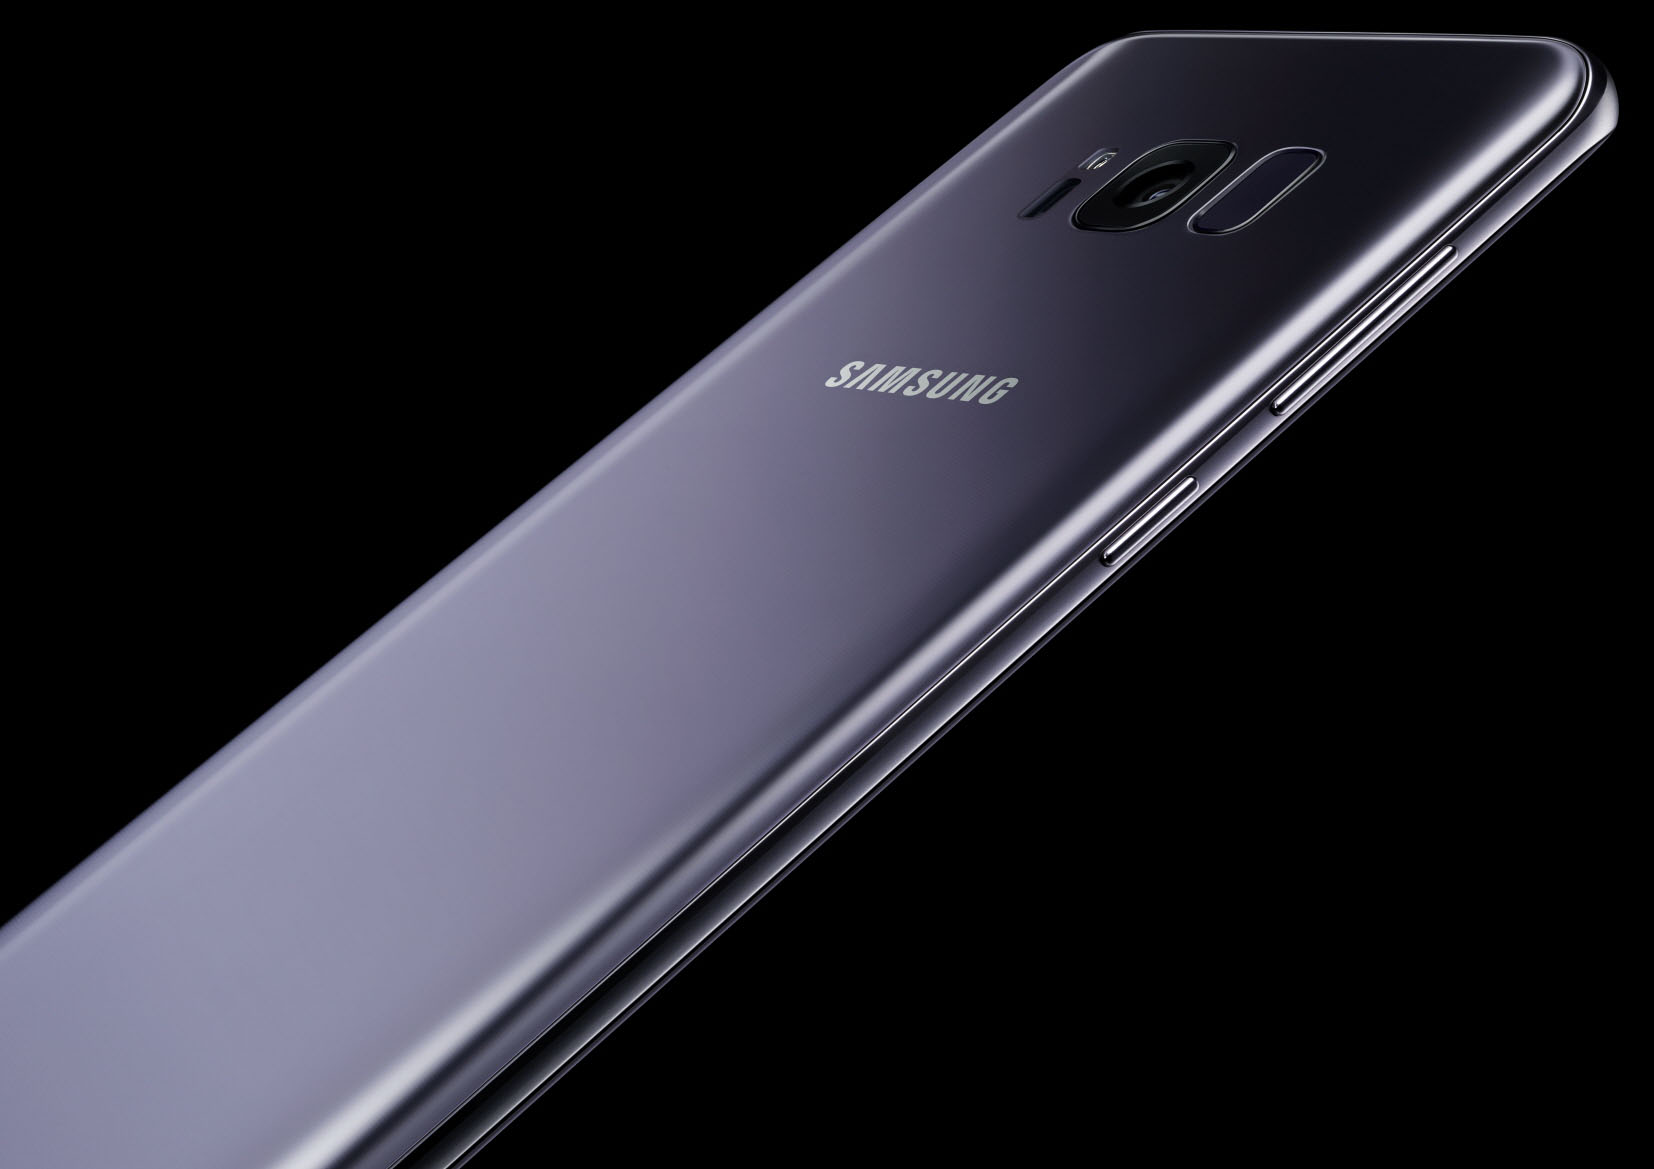 Galaxy S8 update kills its fast charging feature but Samsung is working on a workaround